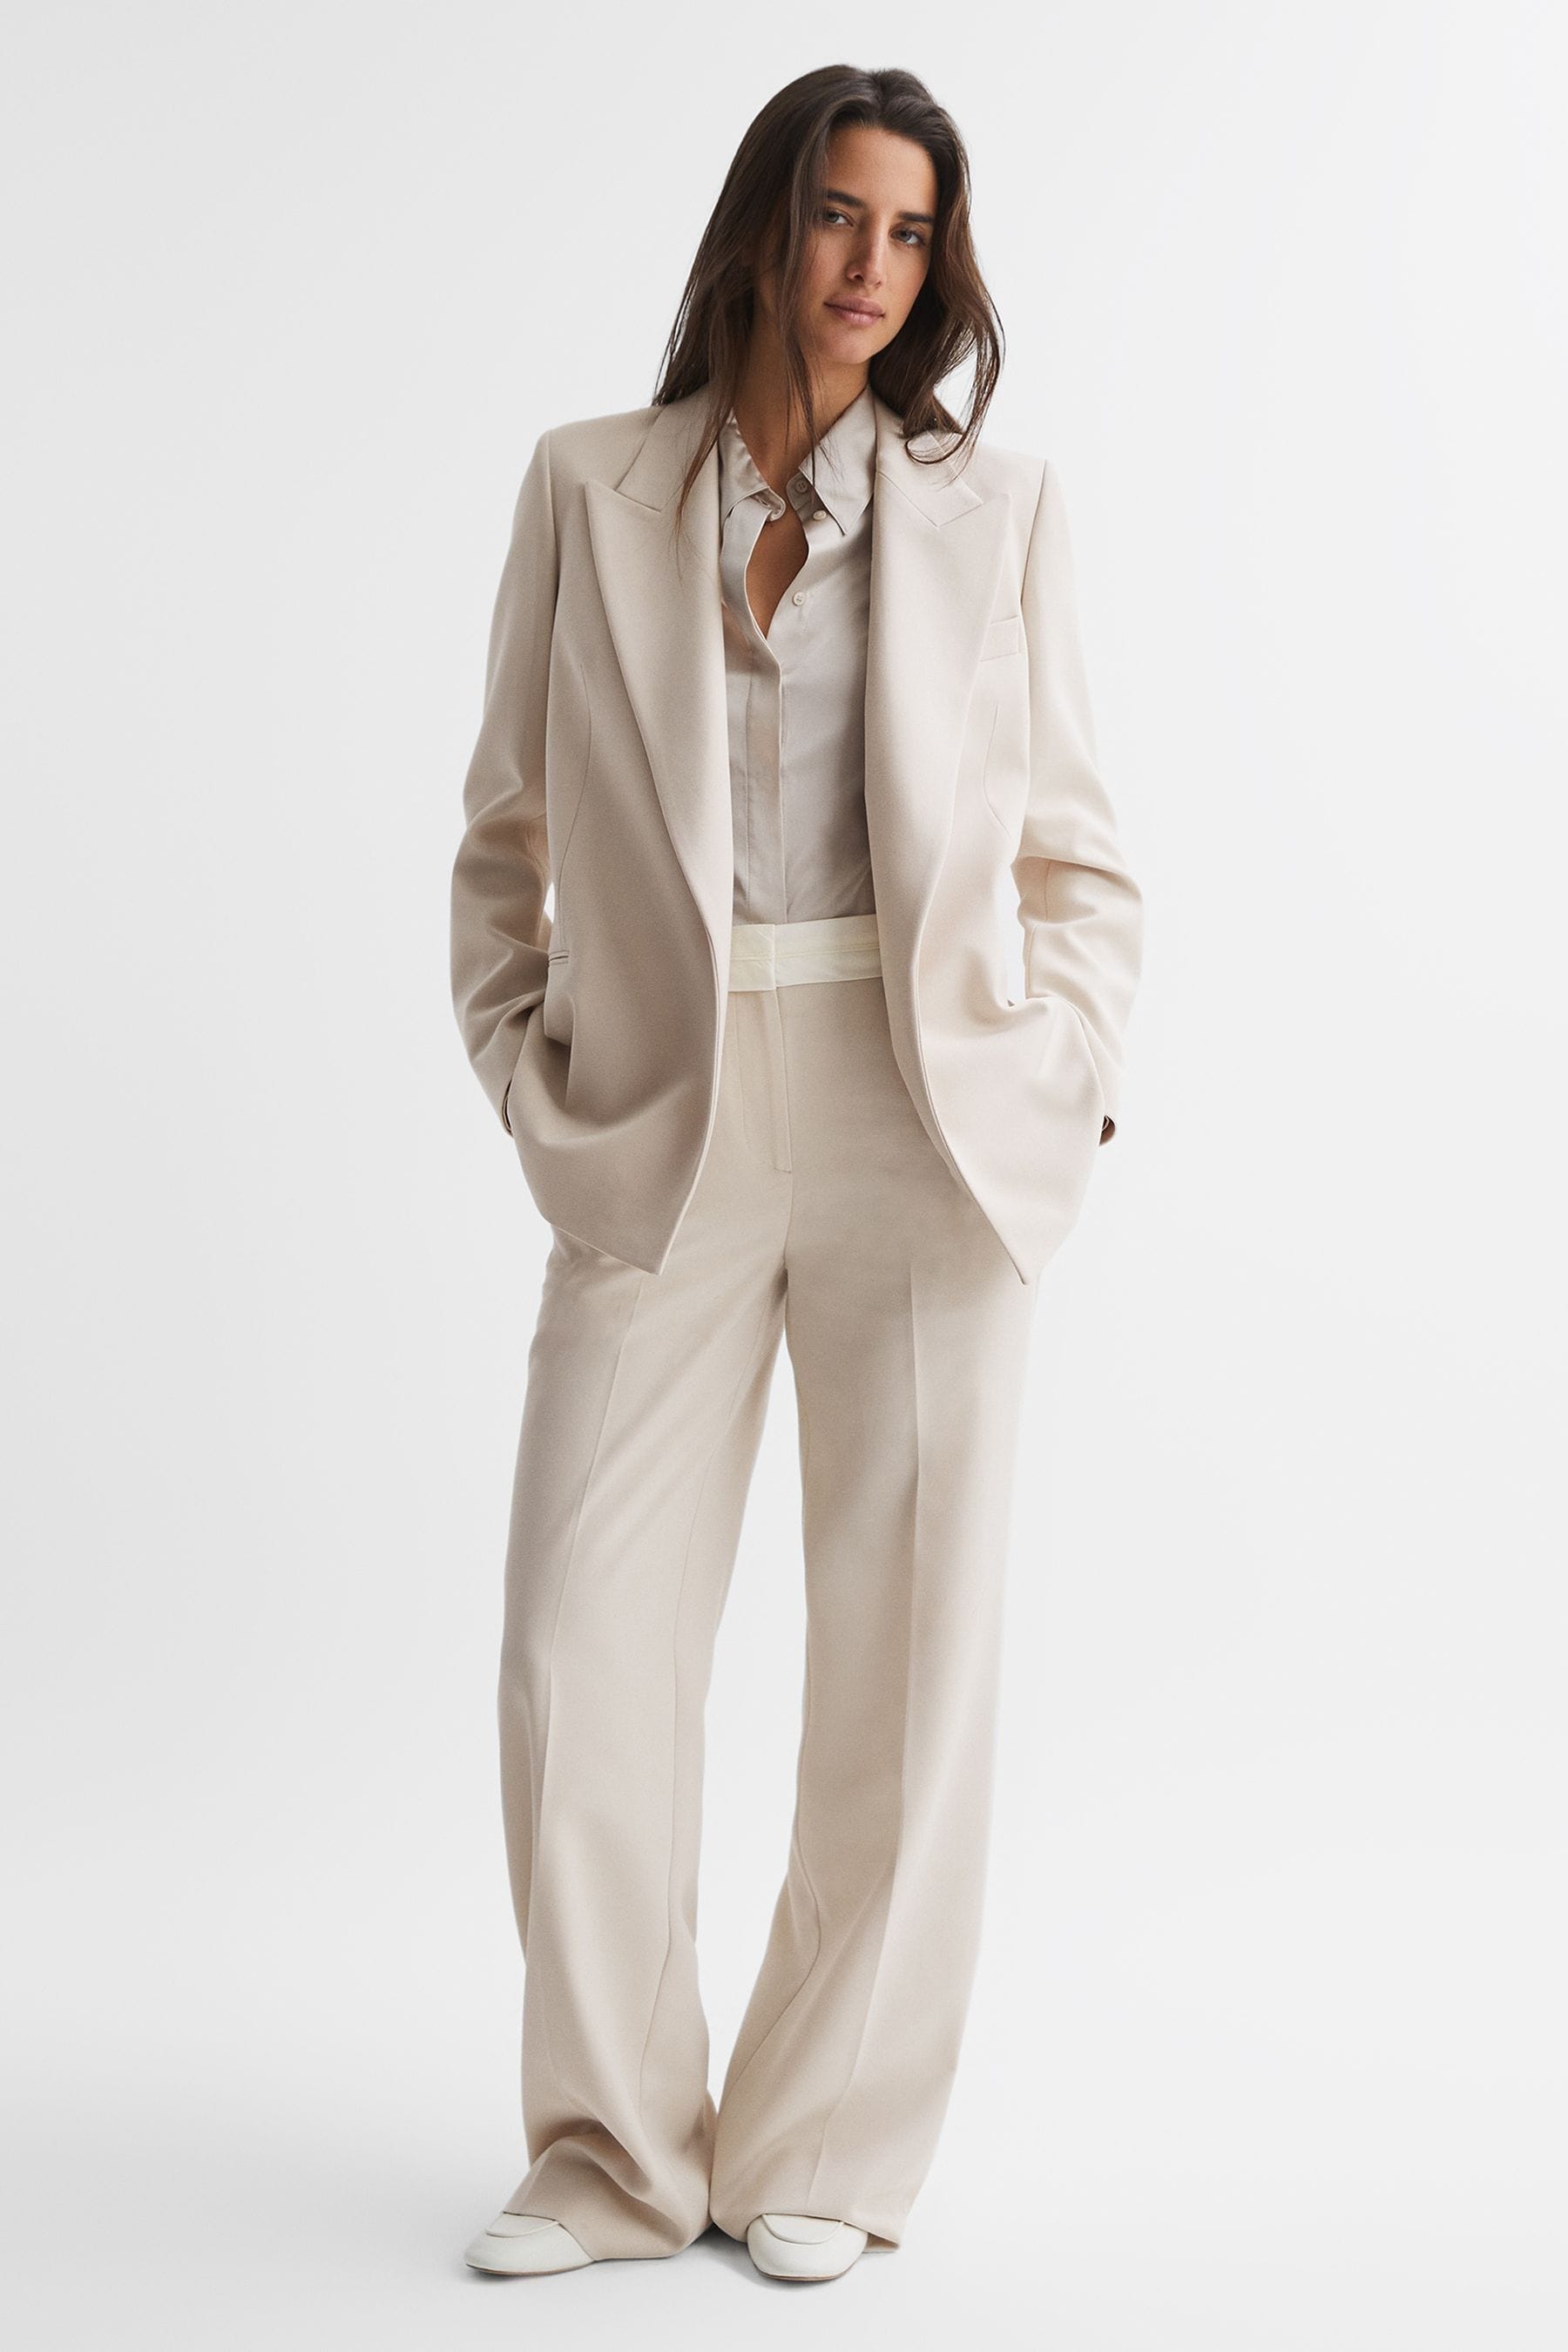 REISS MAYA - NEUTRAL PETITE TAILORED FIT SINGLE BREASTED SUIT BLAZER, US 8